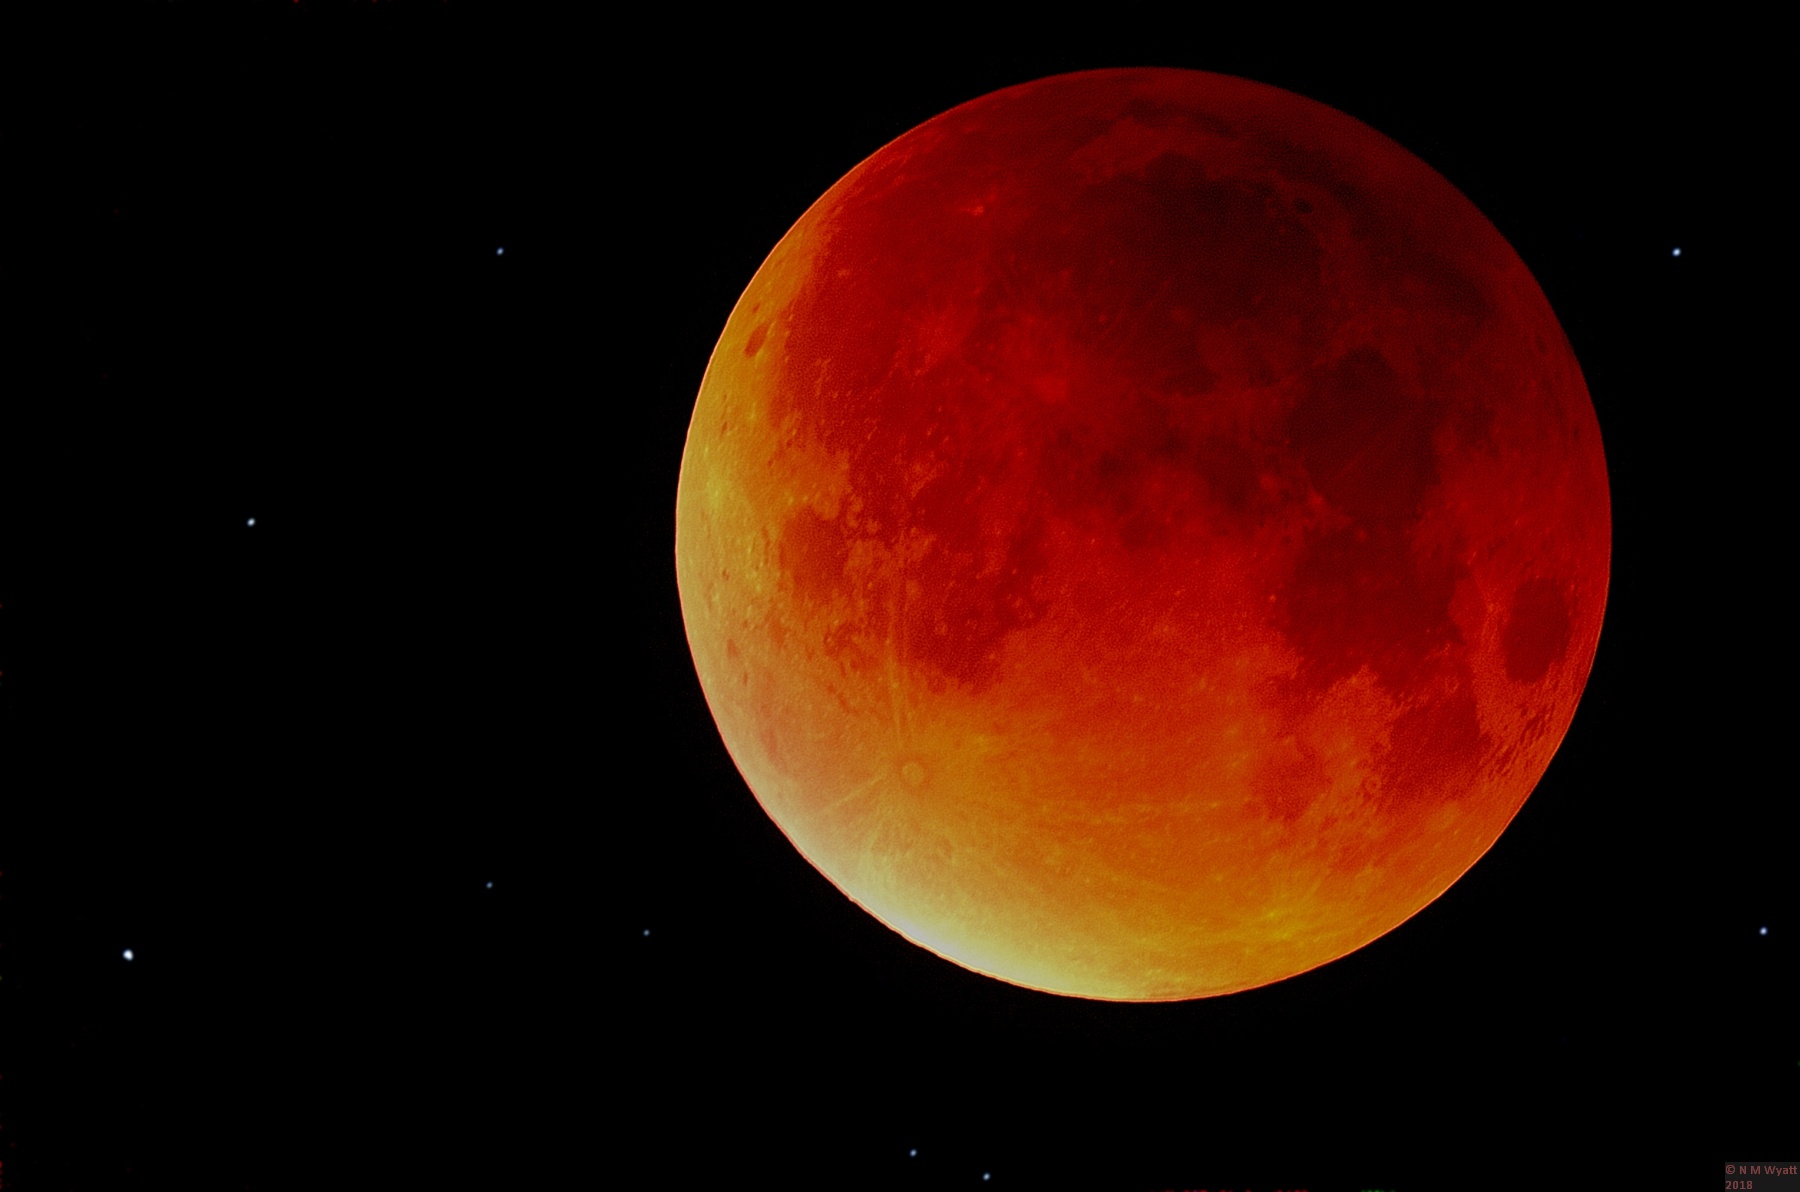 Probably the finest picture of Lunar Eclipse 28 September 2015 on the internet